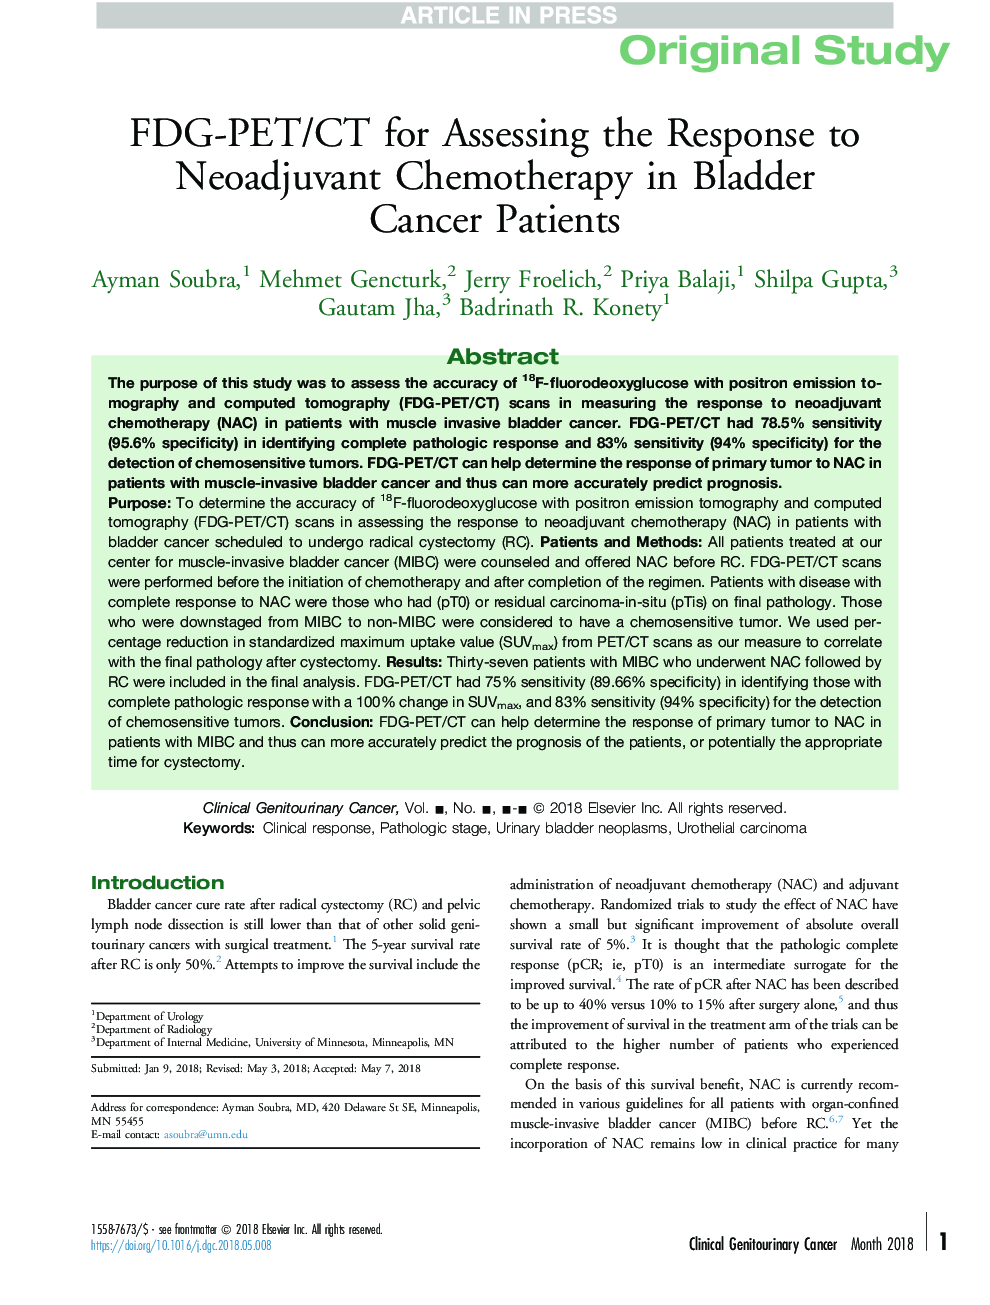 FDG-PET/CT for Assessing the Response to Neoadjuvant Chemotherapy in Bladder Cancer Patients